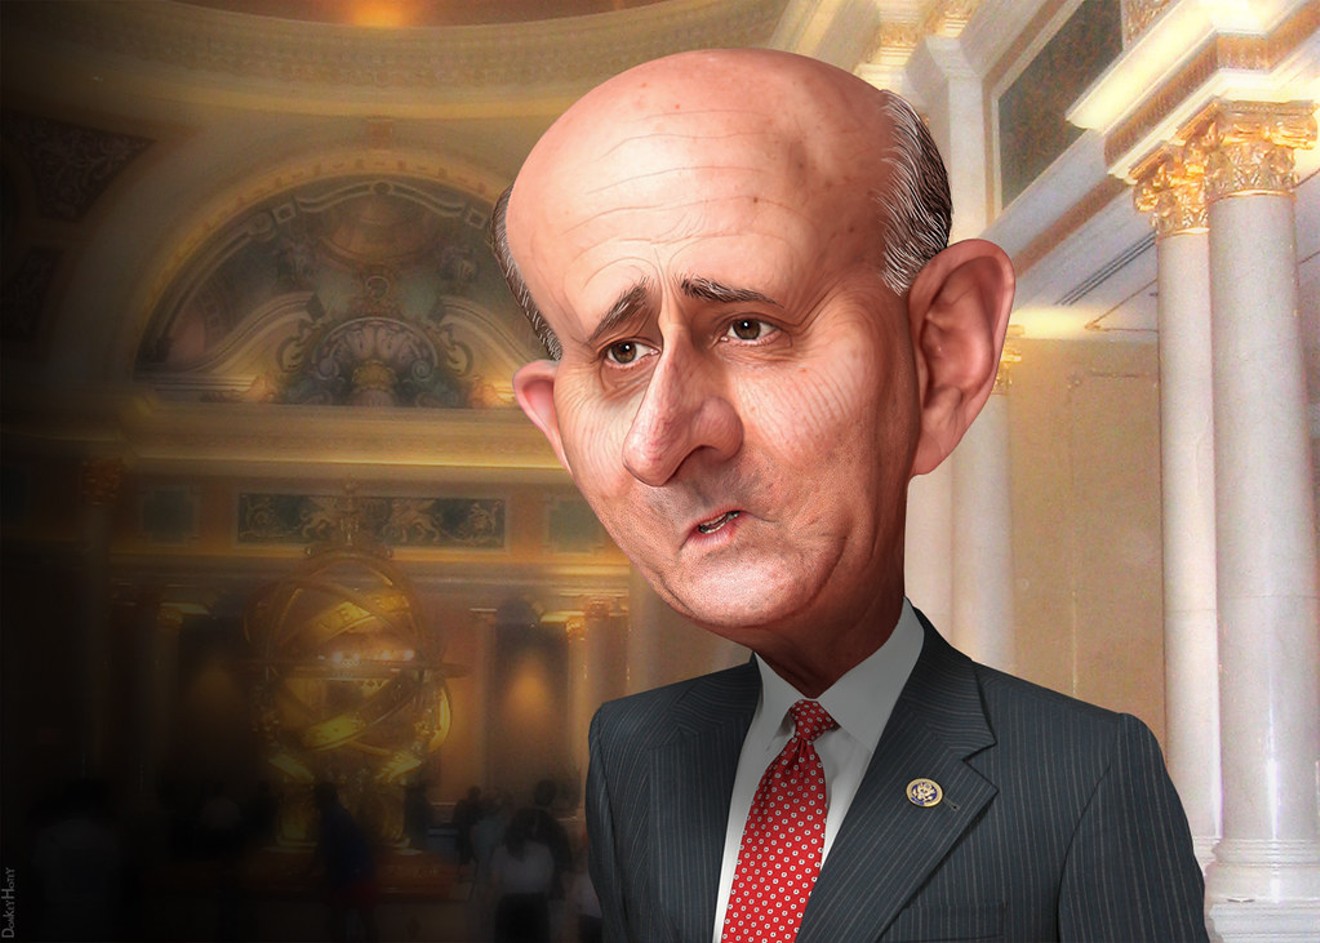 East Texas U.S. Rep. Louie Gohmert agreed to join the "America First Caucus."